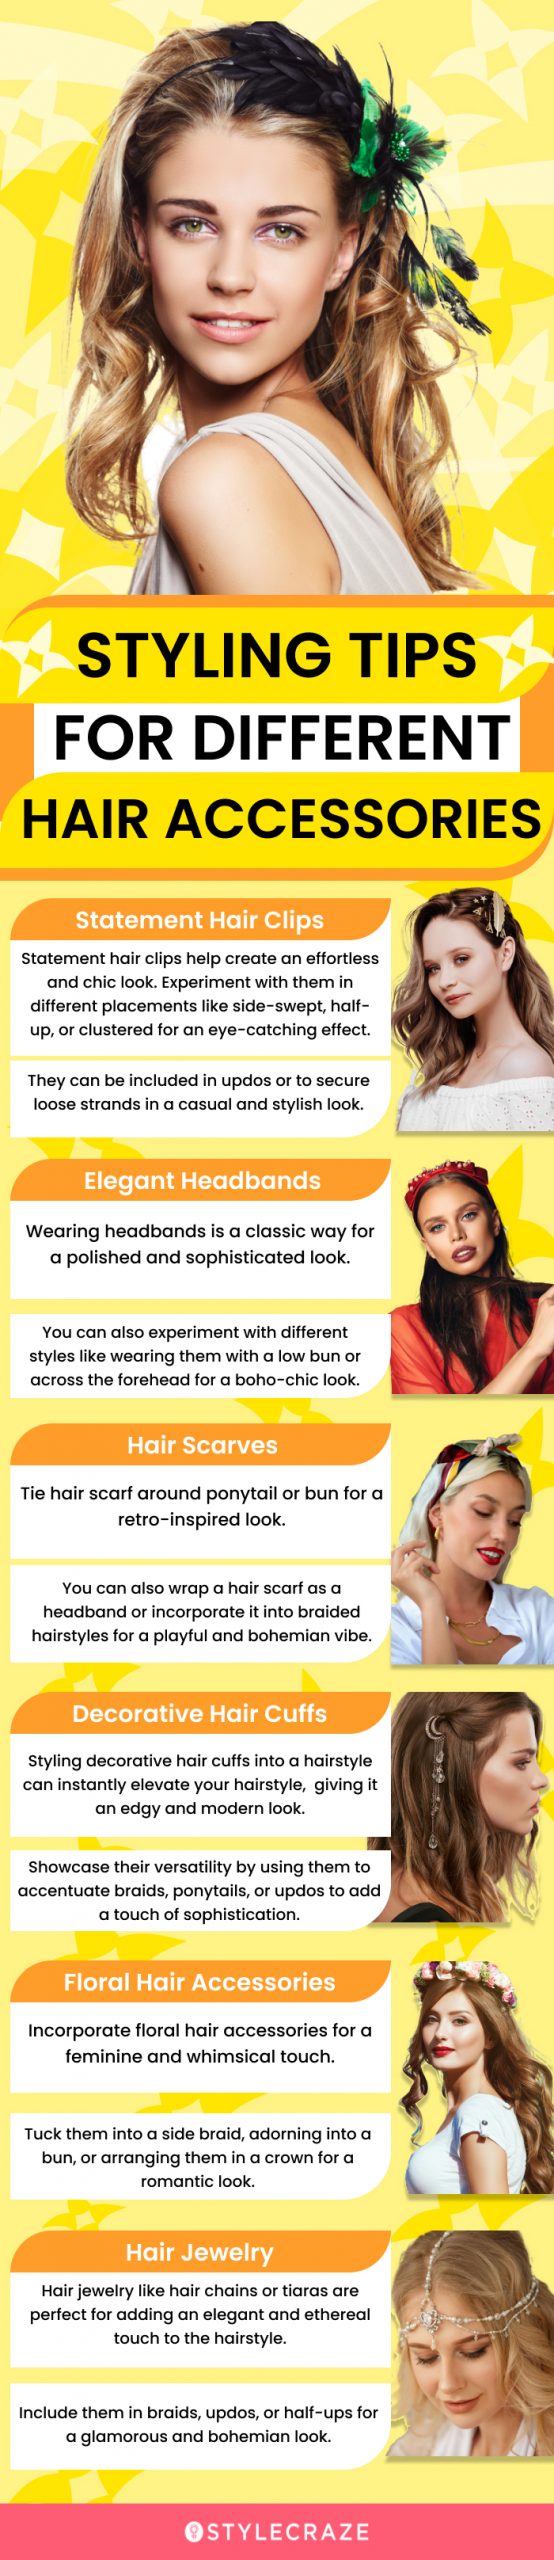 19 Fun Hair Accessories on Sale to Lift Your Ponytails and Your